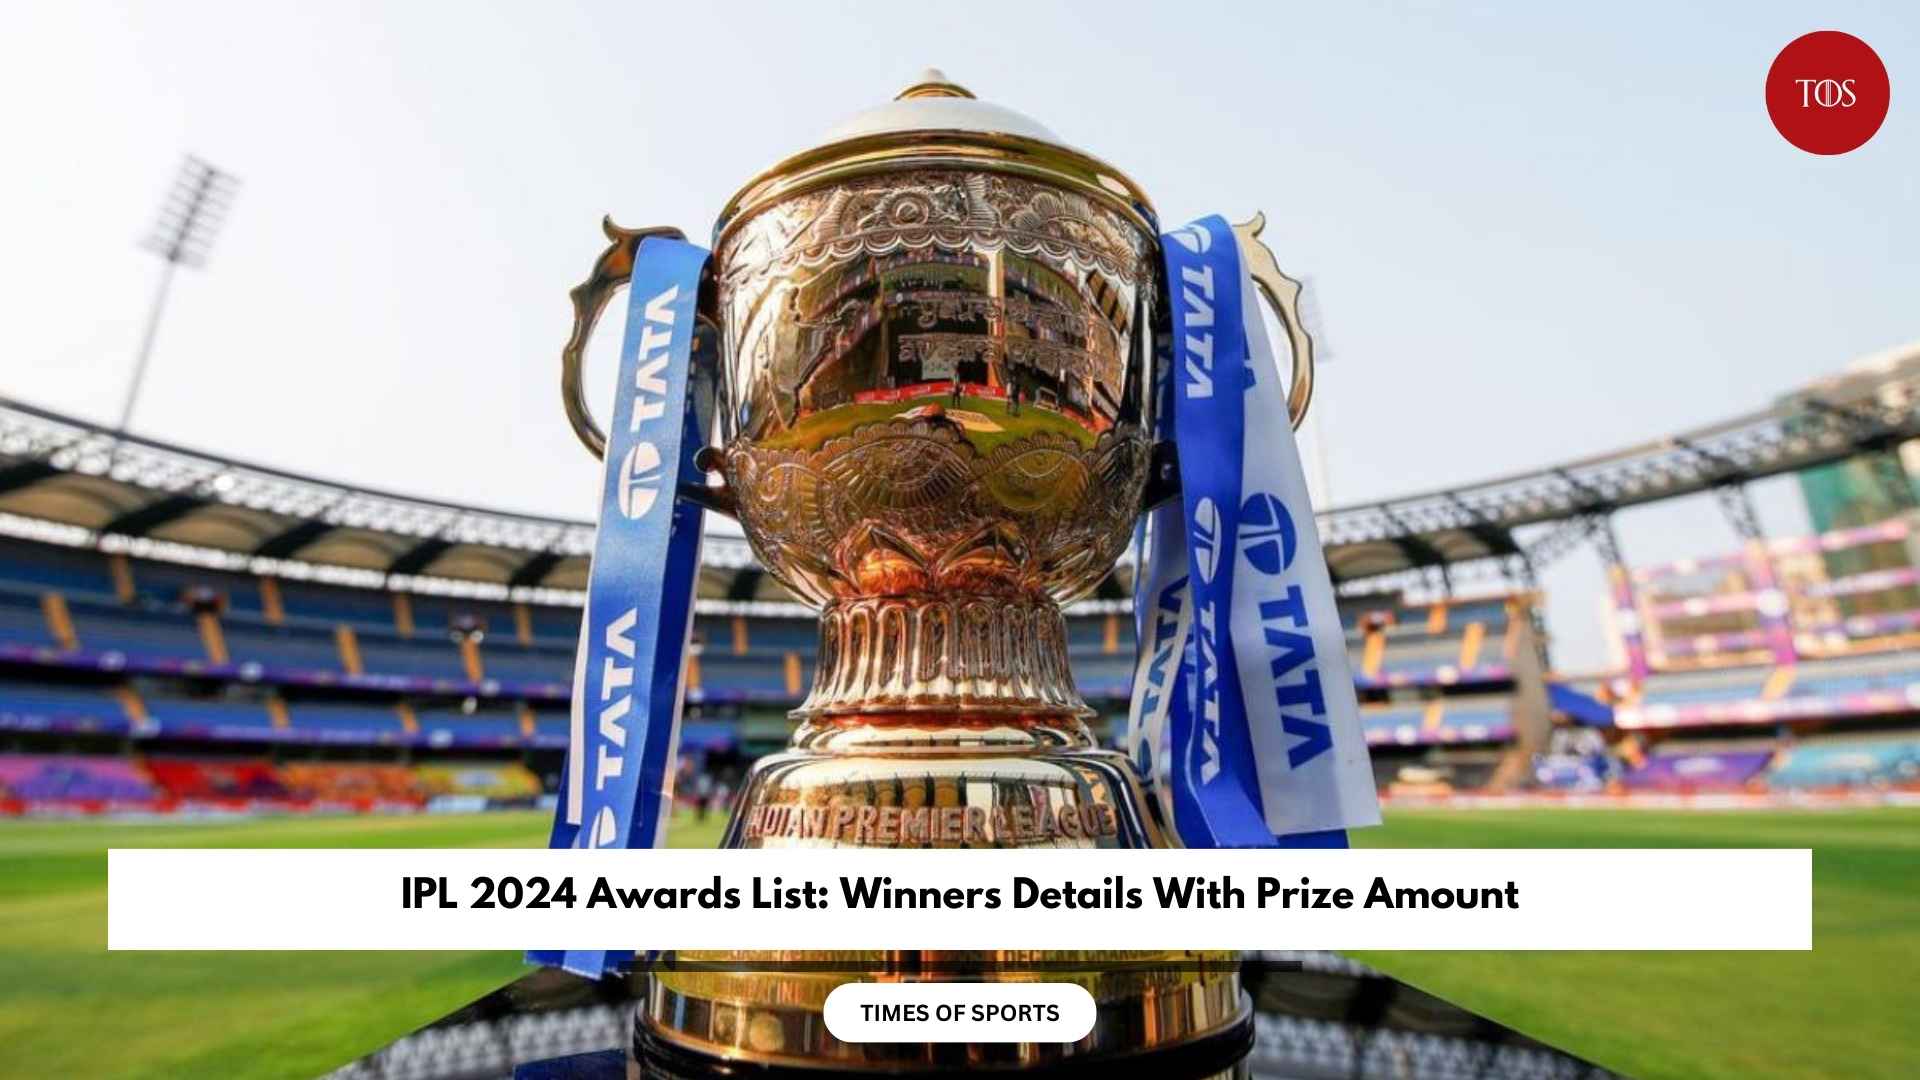 IPL 2024 Awards List Winners Details With Prize Amount